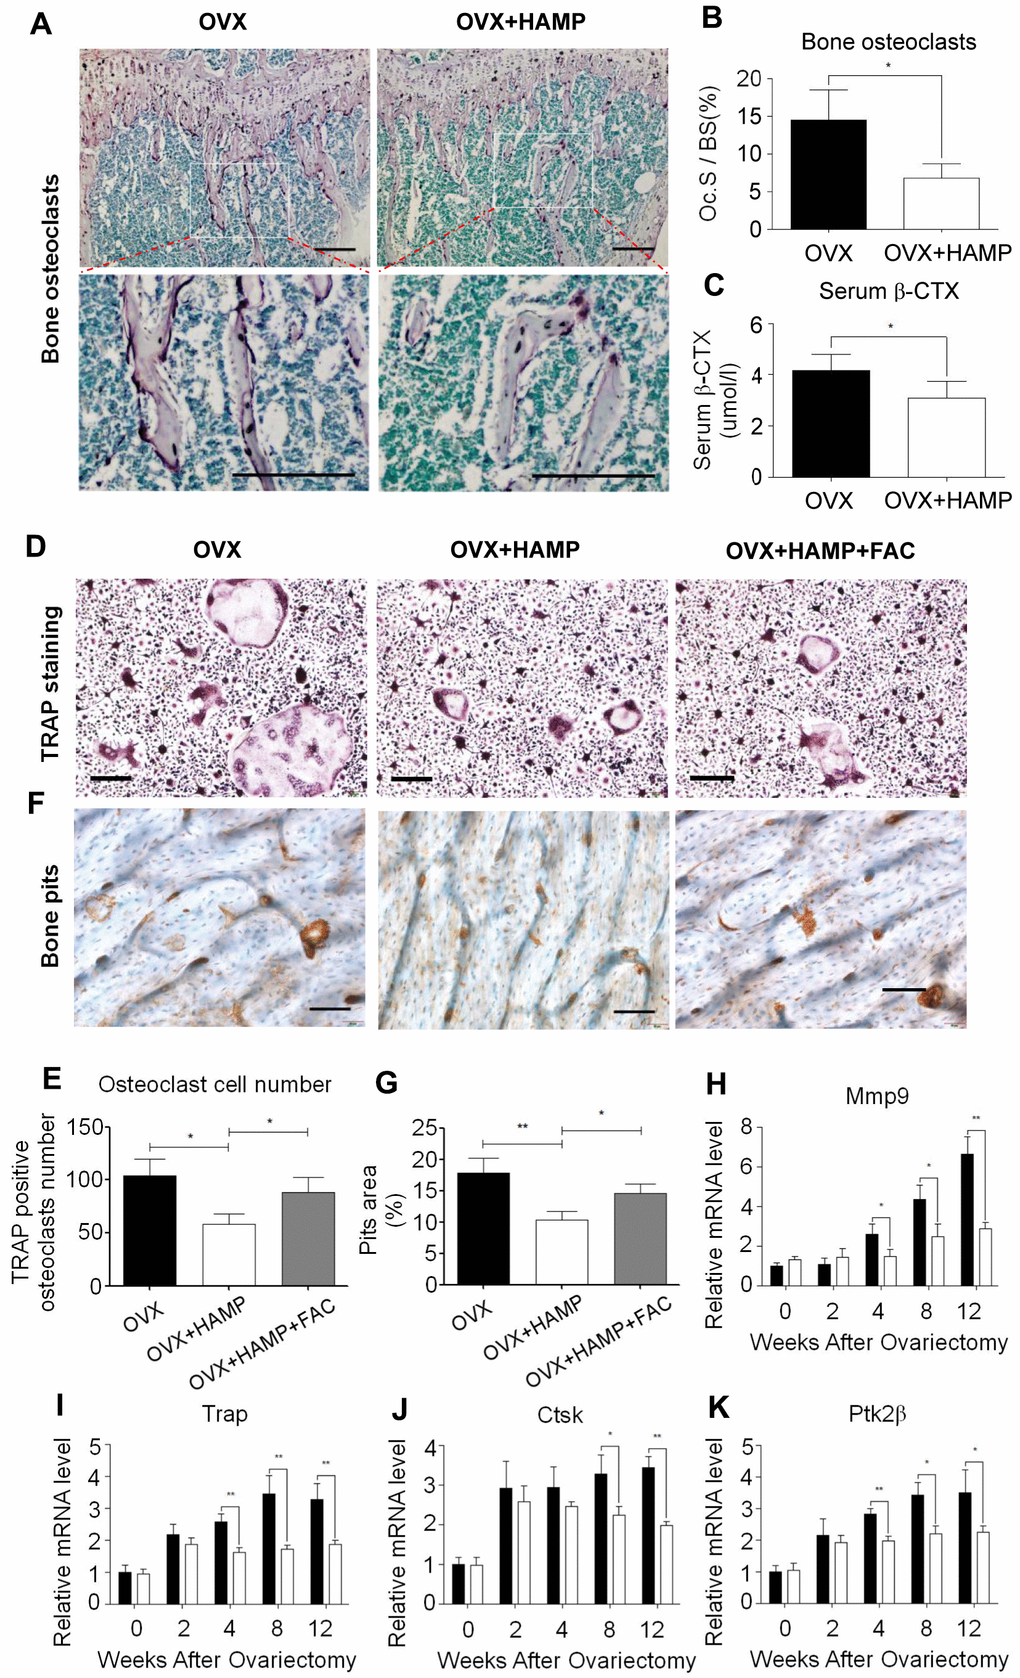 Hepcidin overexpression inhibits osteoclast number and differentiate in the OVX mouse. (A, B) TRAP staining shows that overexpression Hepcidin significantly inhibits the number of osteoclasts in femoral bone in the OVX mouse; (C) Overexpression hepcidin decrease CTX concentration in the OVX mouse serum. Bone marrow macrophage, which extracted from femur and cultured with M-CSF and RANKL for 8 days, stained with TRAP to assess its differentiation. (D) TRAP staining revealed that differentiation of osteoclasts in vivo M-SCF induced in the OVX mouse; (E) The osteoclasts were counted in the overexpression hepcidin and non overexpression hepcidin OVX mice; (F) The bone pits in vivo M-SCF induced osteoclasts, which was separate from OVX mouse; (G) The bone pits in vivo M-SCF induced osteoclasts, which was separate from overexpression hepcidin OVX mouse; Quantitative polymerase chain reaction (q-PCR) analysis of the expression of bone resorption markers, including (H) Mmp9, (I) Trap, (J) Ctsk and (K) Ptk2β. Scale bar, 200 μm. The asterisks (*, **) indicate significant differences at P 